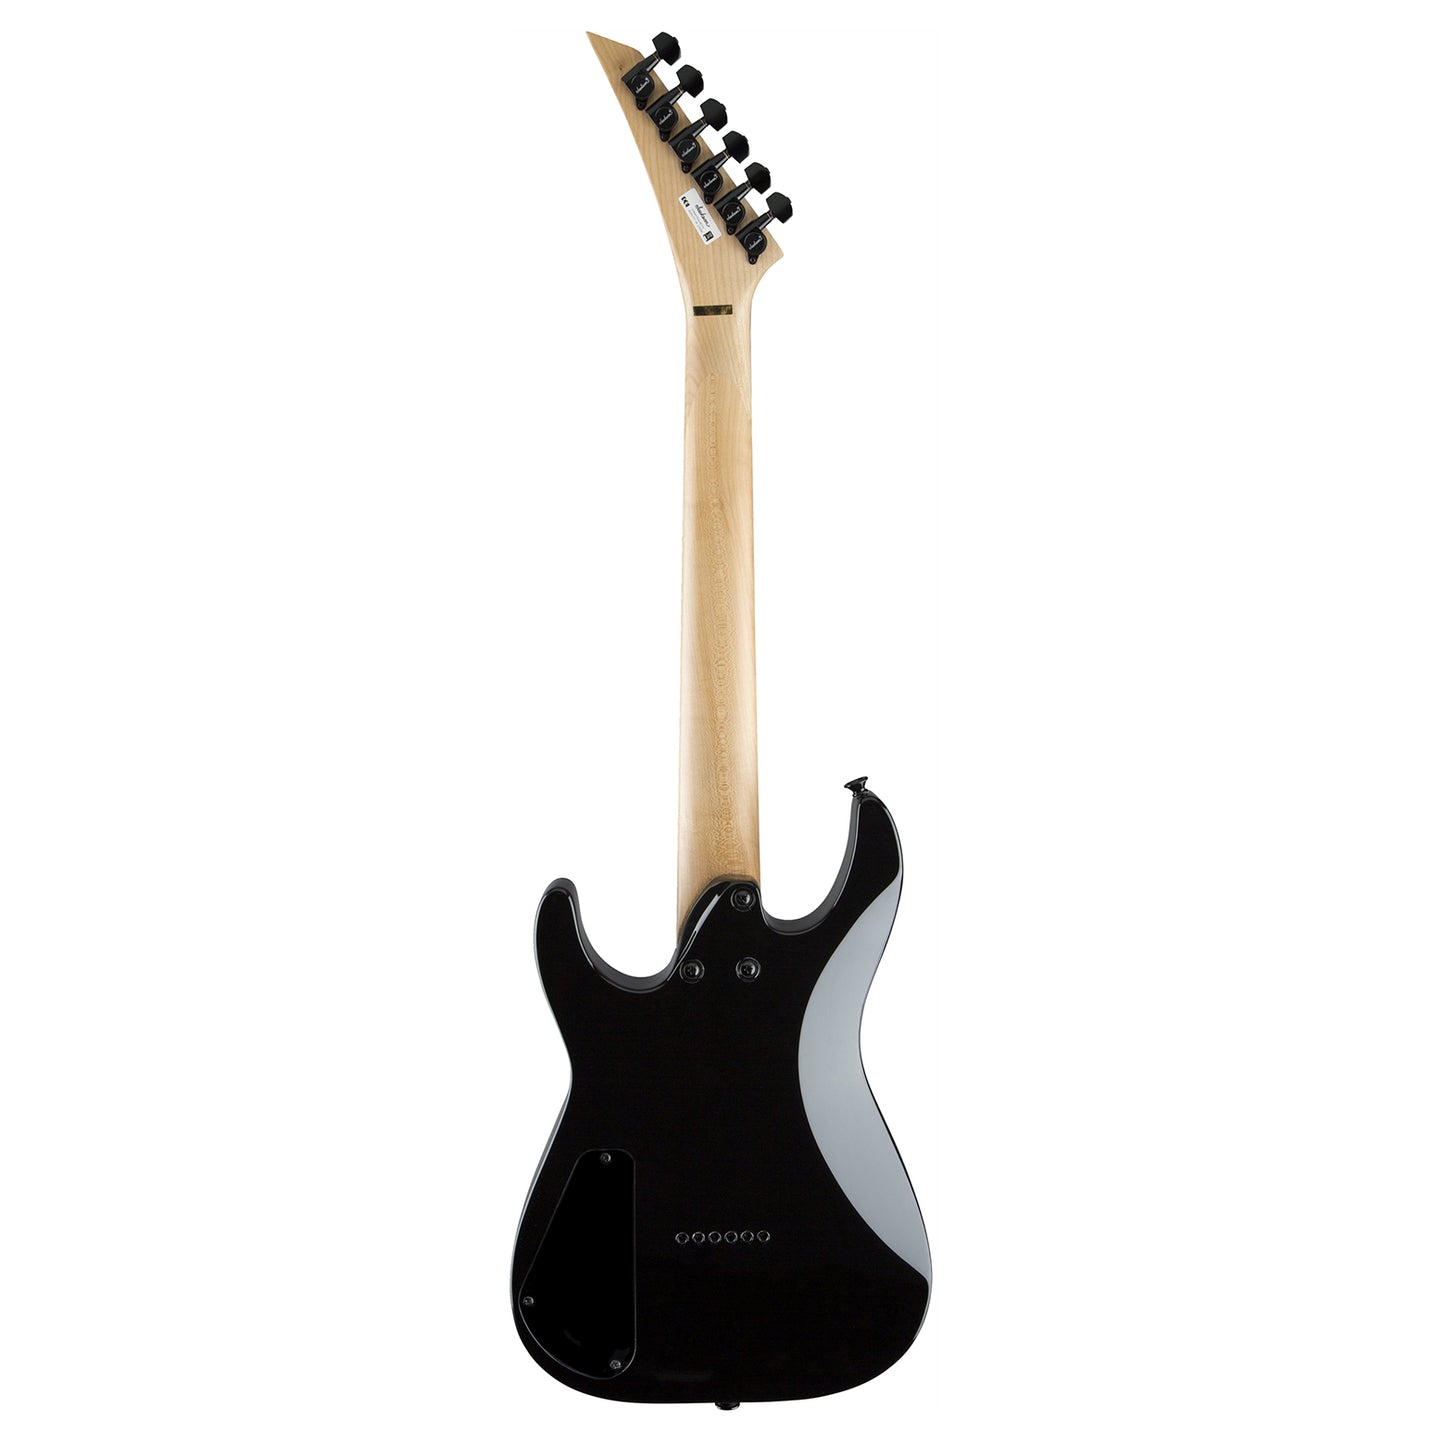 Jackson JS1X Dinky Minion Electric Guitar HH with 24 Frets, 22.5" Short Scale Length, Gloss Black Finish